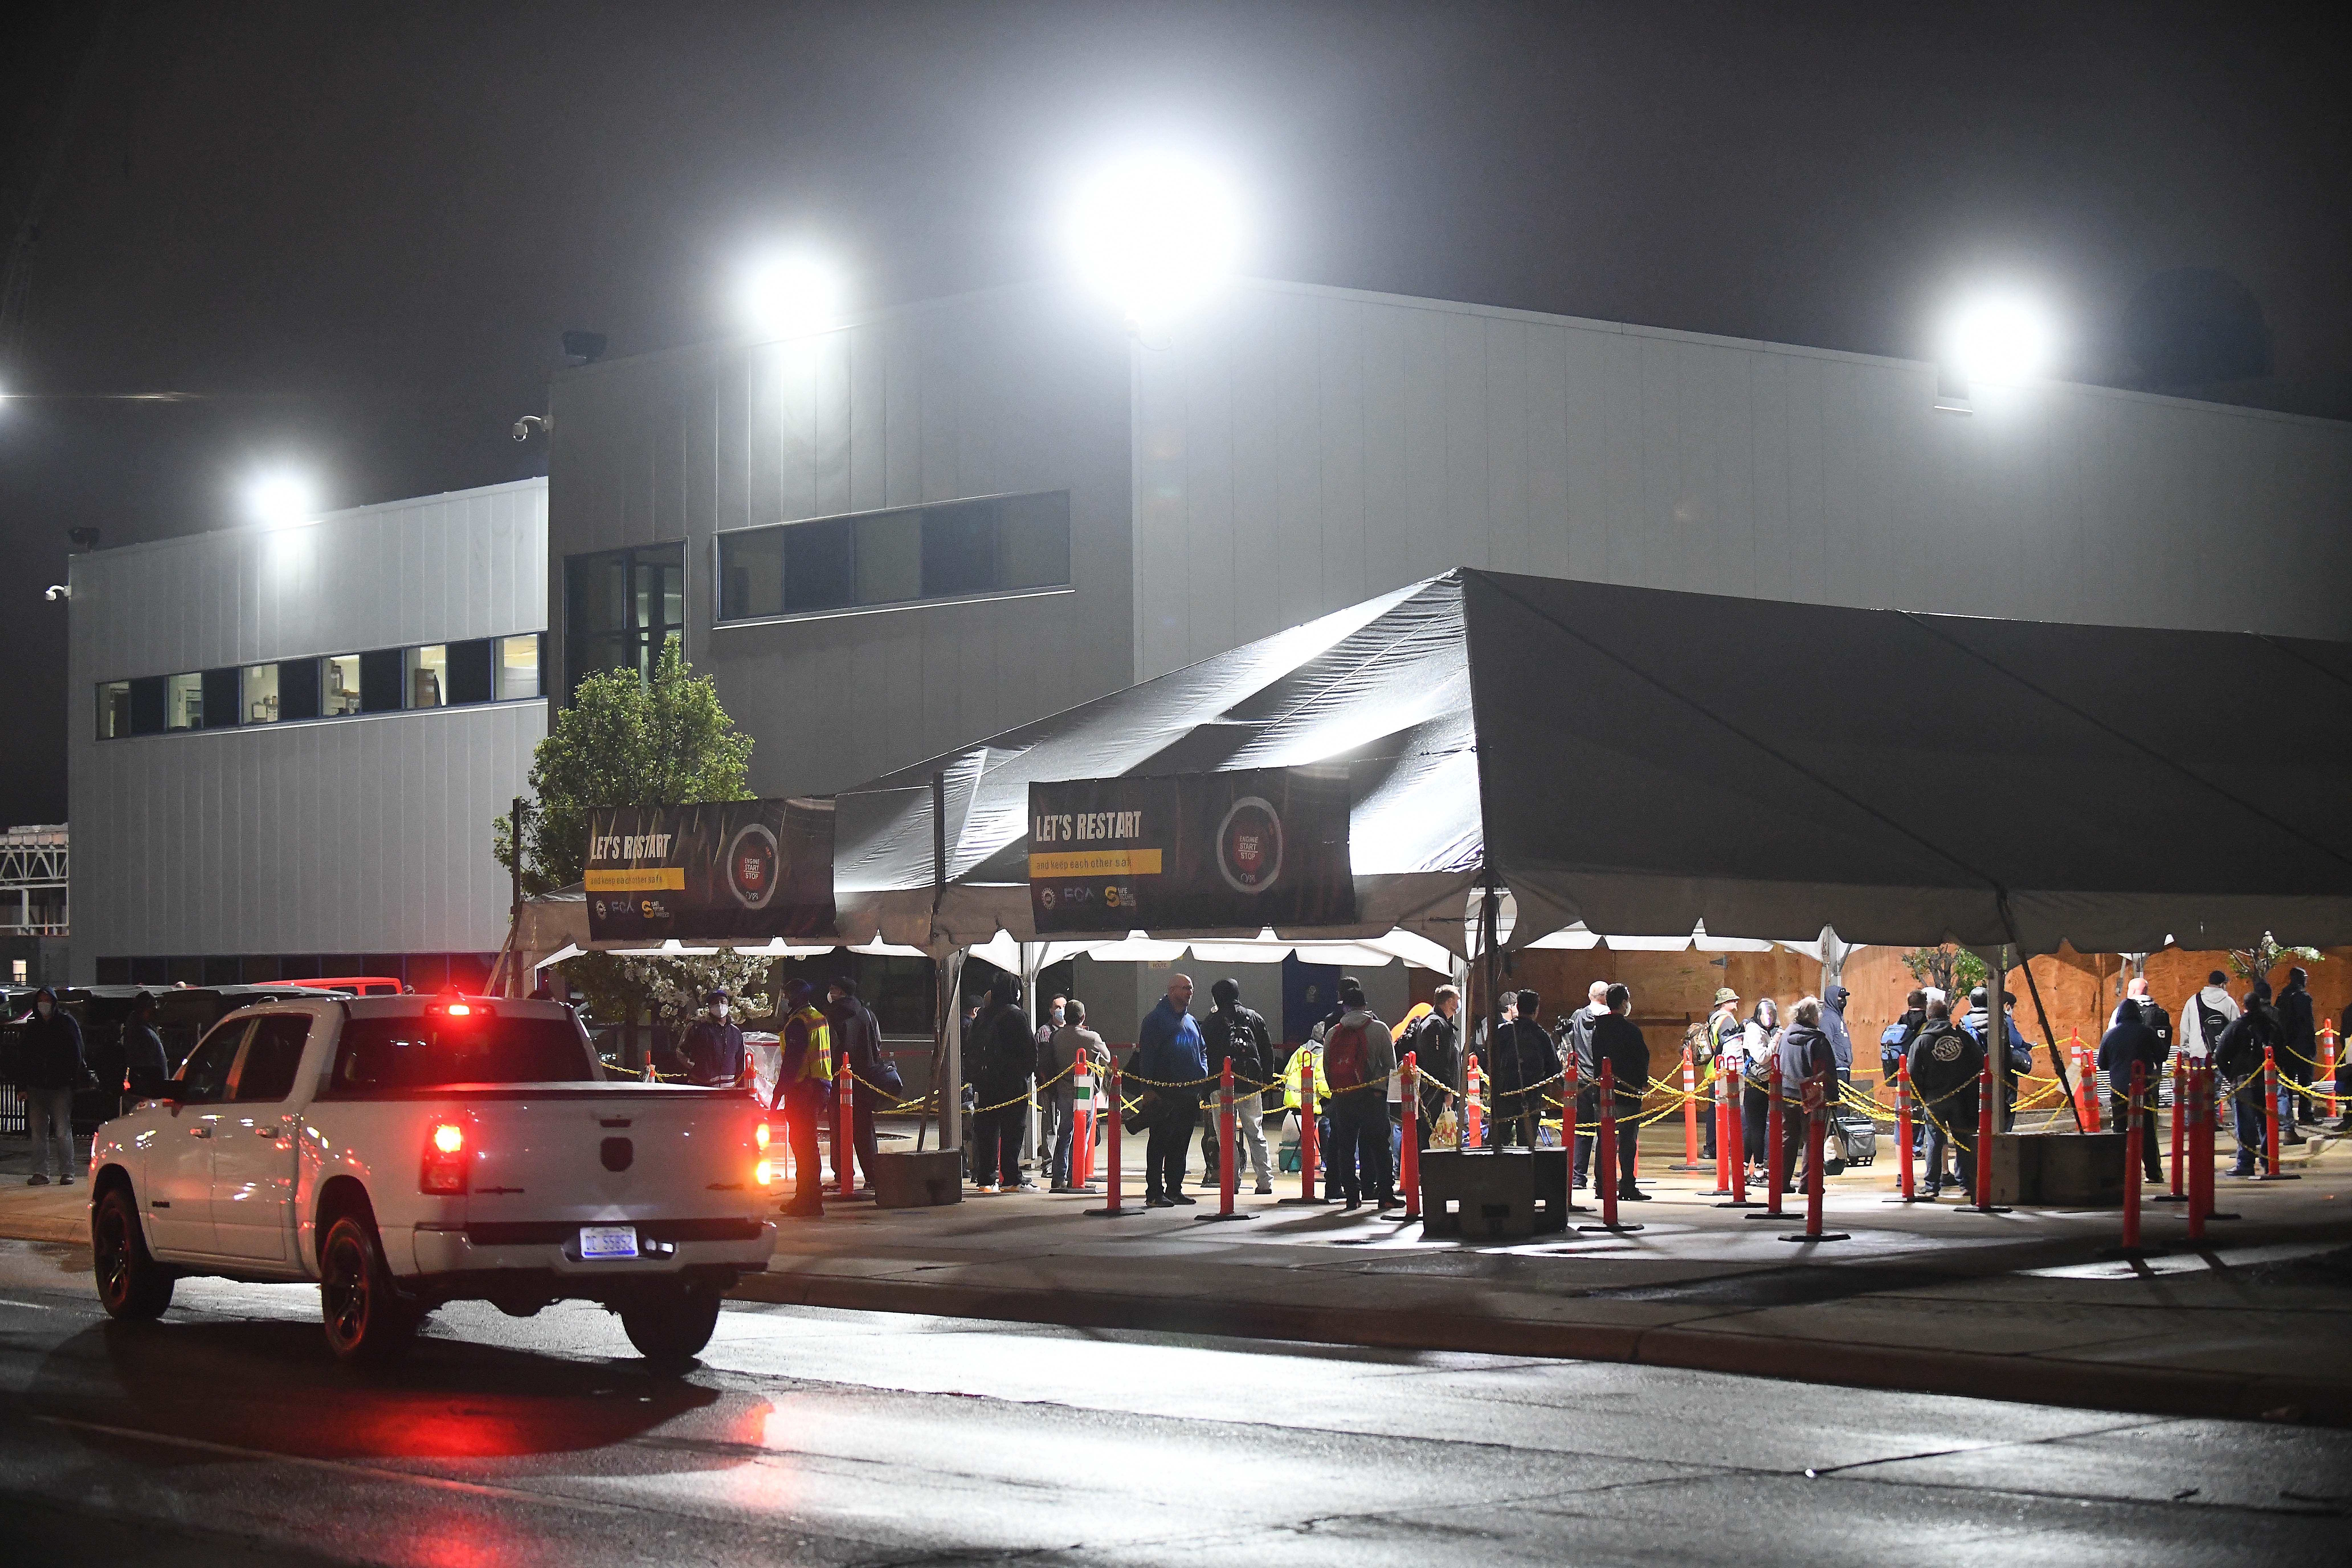 Employees wait in line at 4 am as they arrive at the FCA employee entrance at Warren Truck Assembly in Warren, Michigan early Monday morning, May 18, 2020.